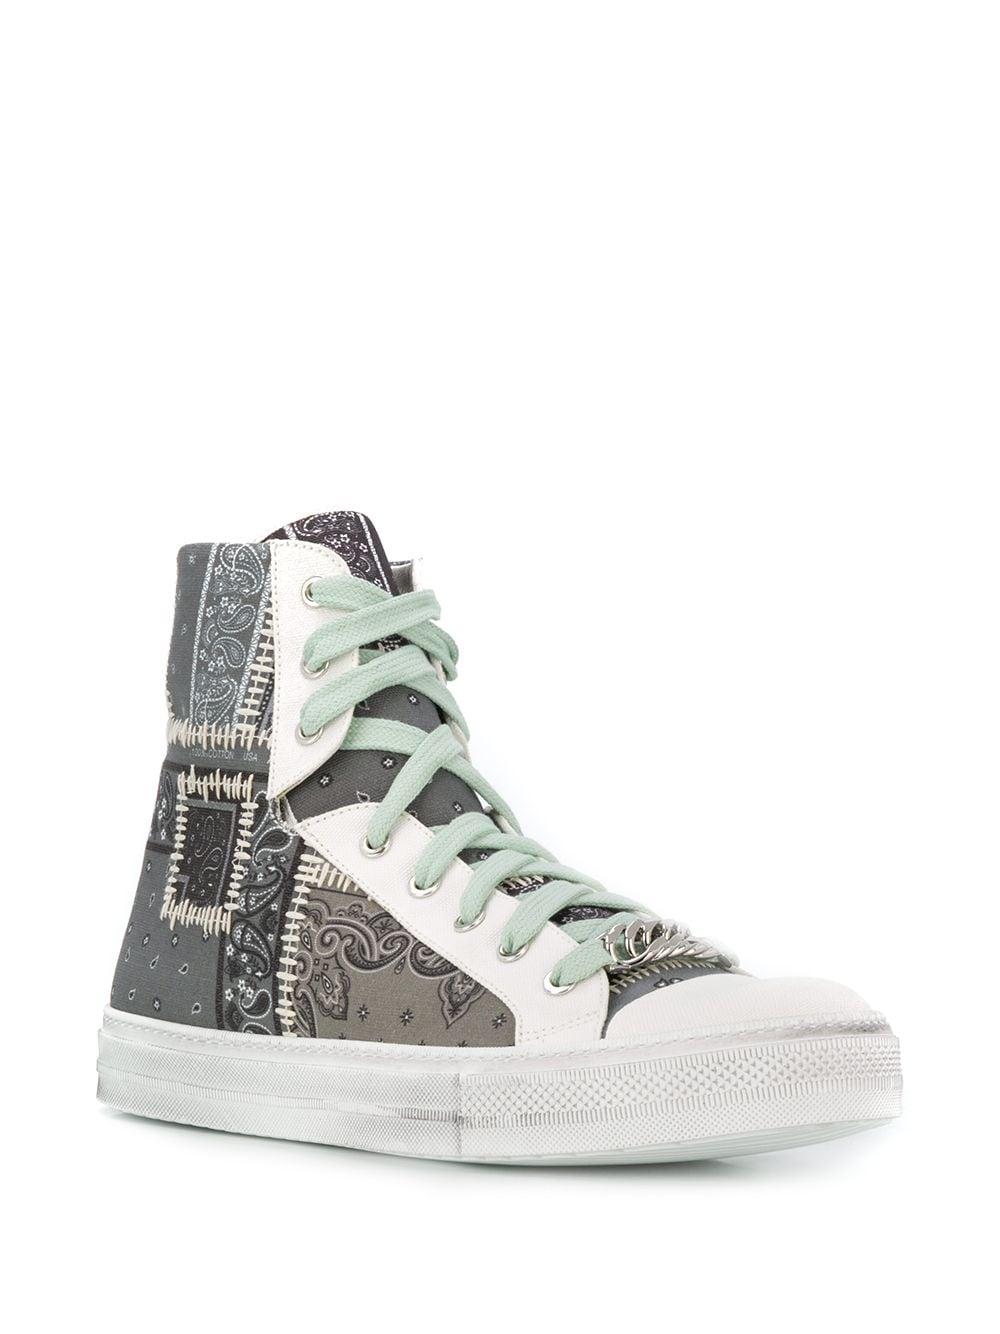 Amiri Rubber Paisley Print High Top Sneakers in White for Men - Lyst